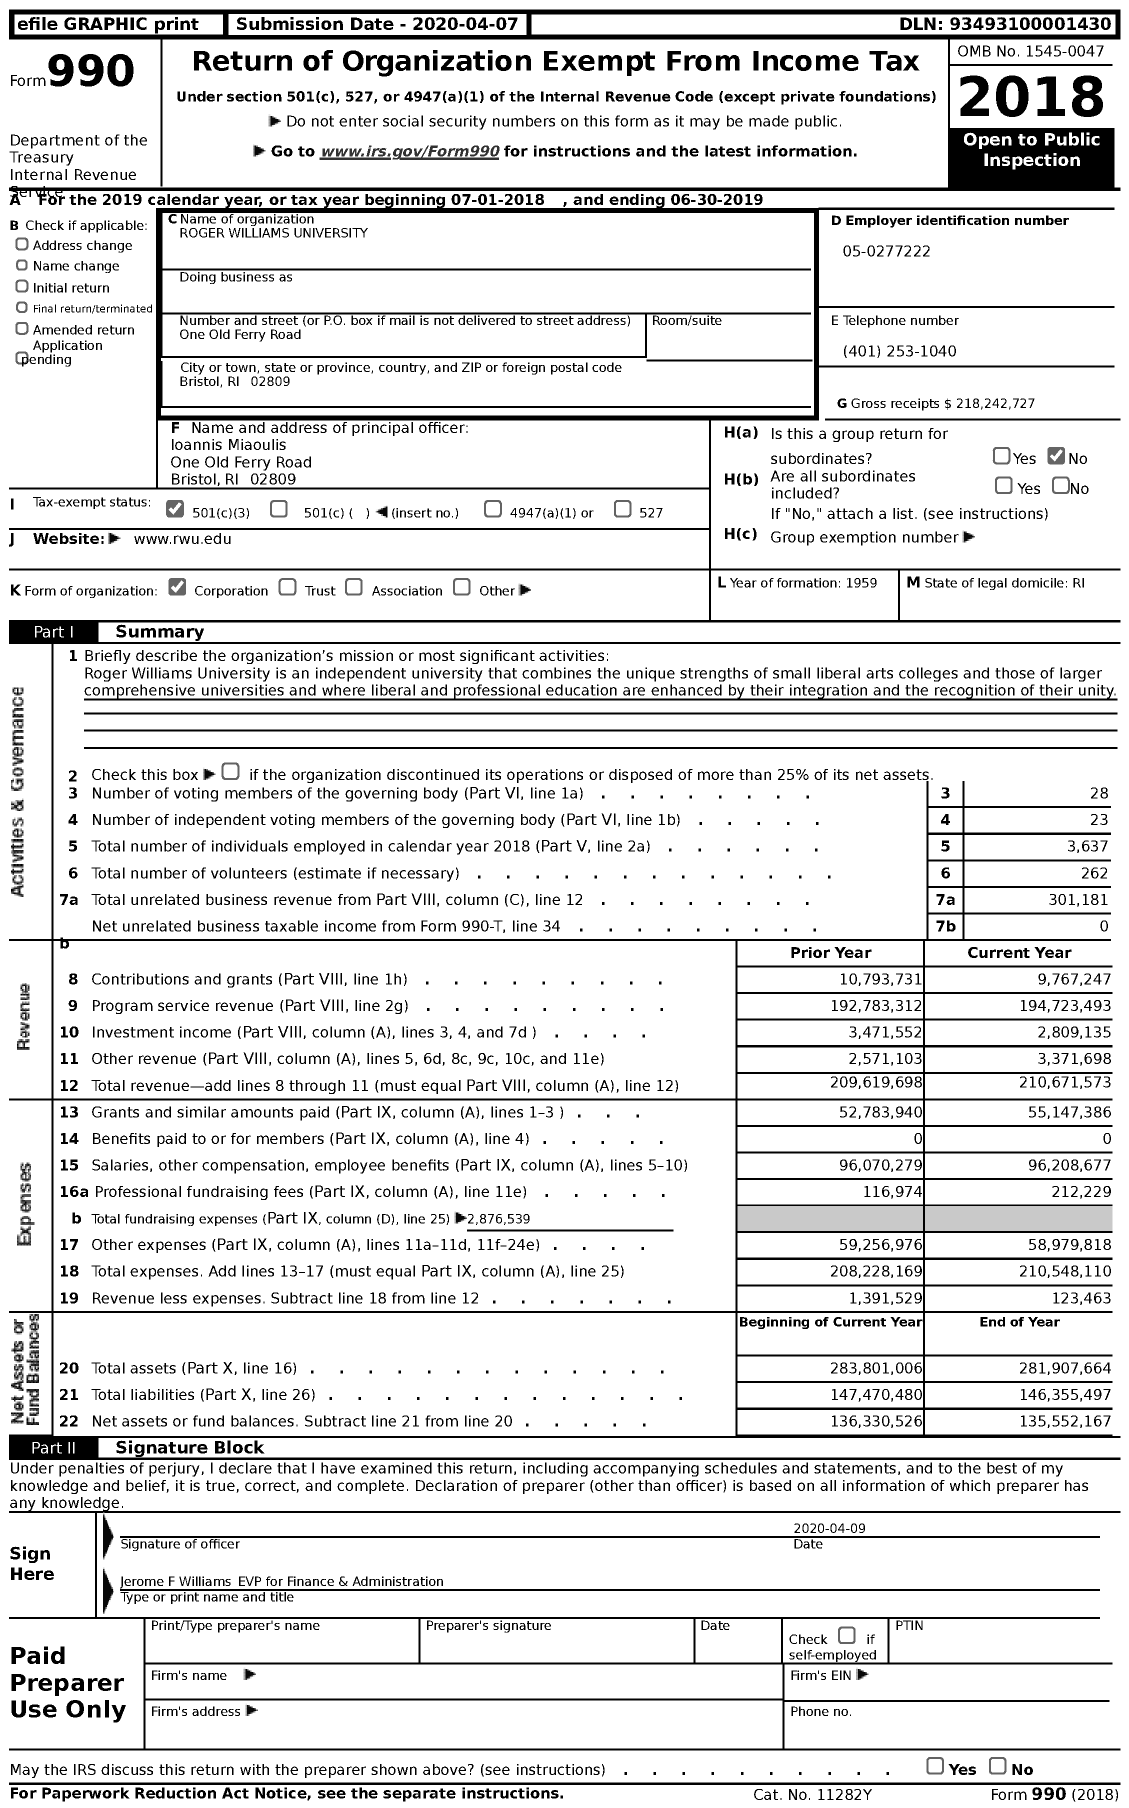 Image of first page of 2018 Form 990 for Roger Williams University (RWU)